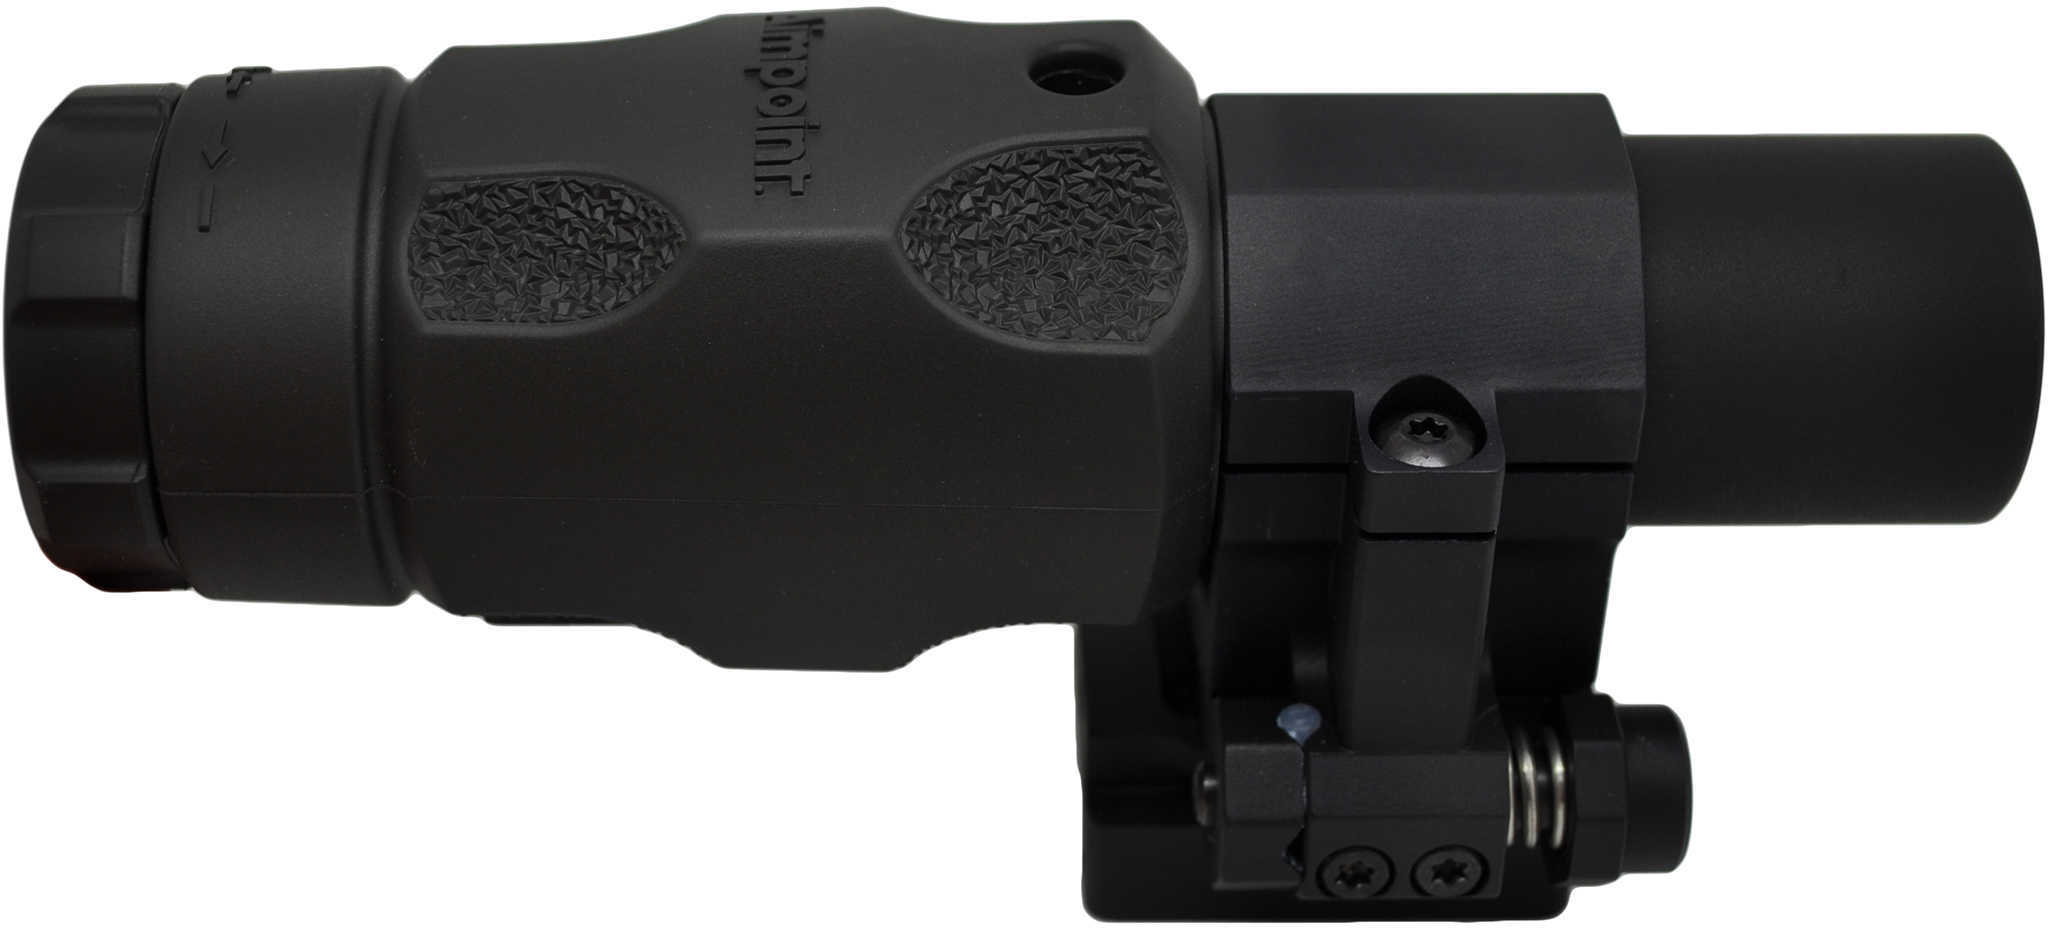 Aimpoint 6x Mag-1 Flip Mount 39mm with Twist Base Md: 200338